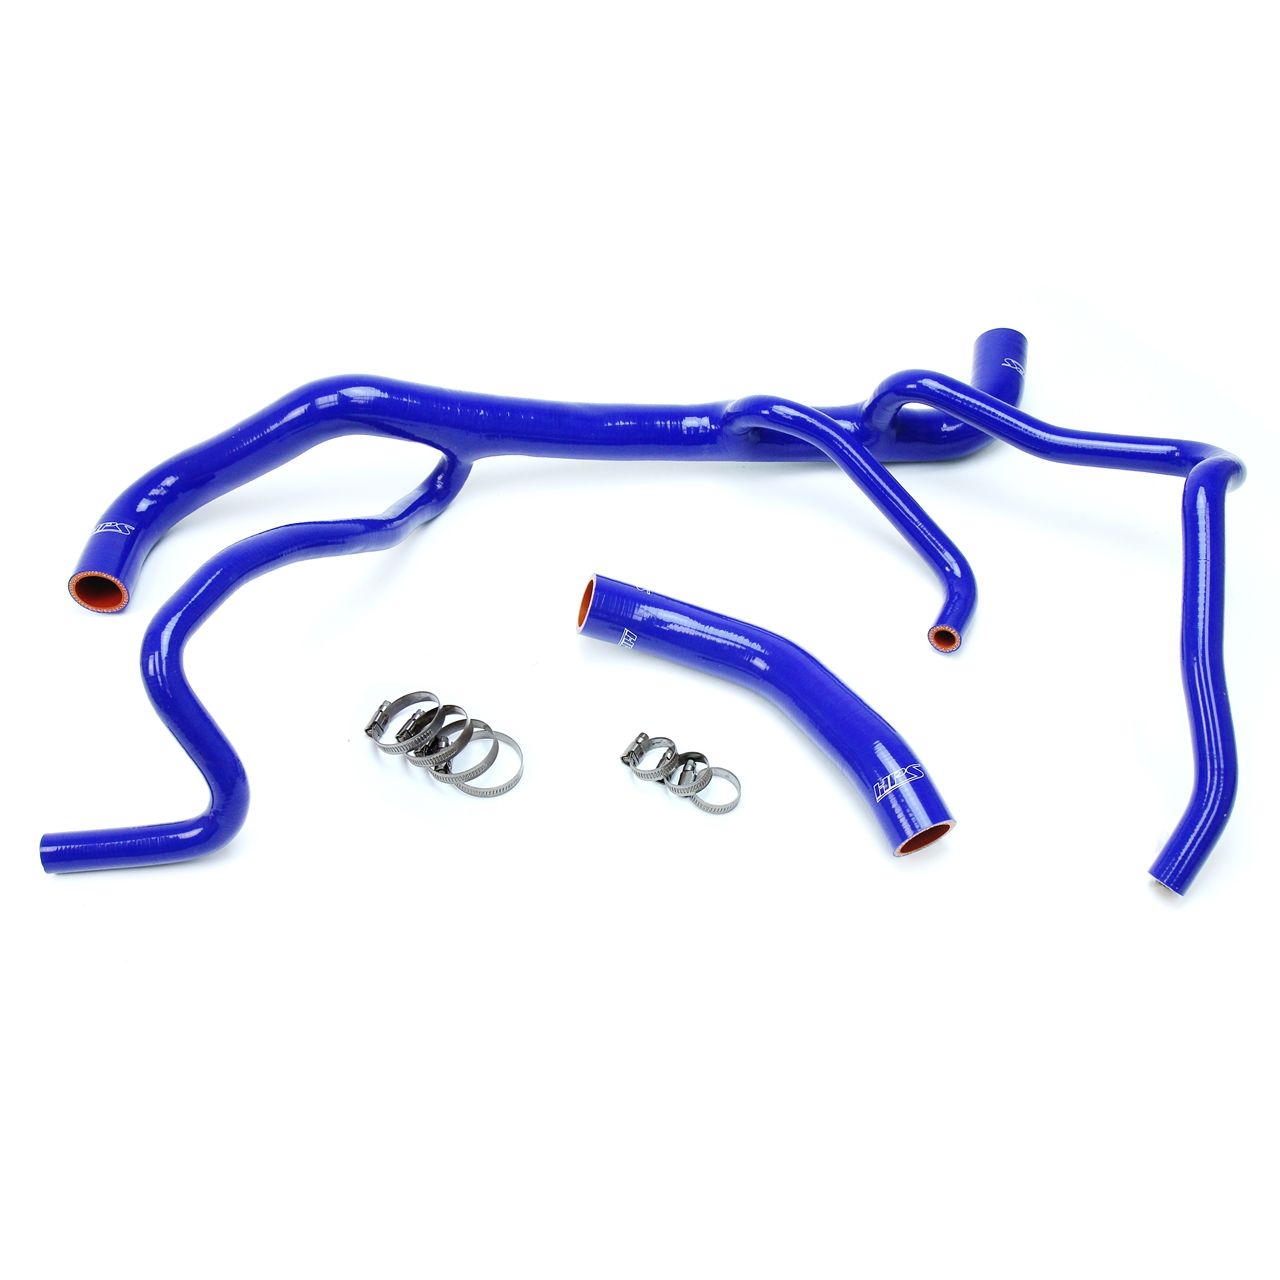 HPS Blue Reinforced Silicone Radiator Hose Kit Coolant for Chevy 16-17 Camaro SS Coupe 6.2L V8